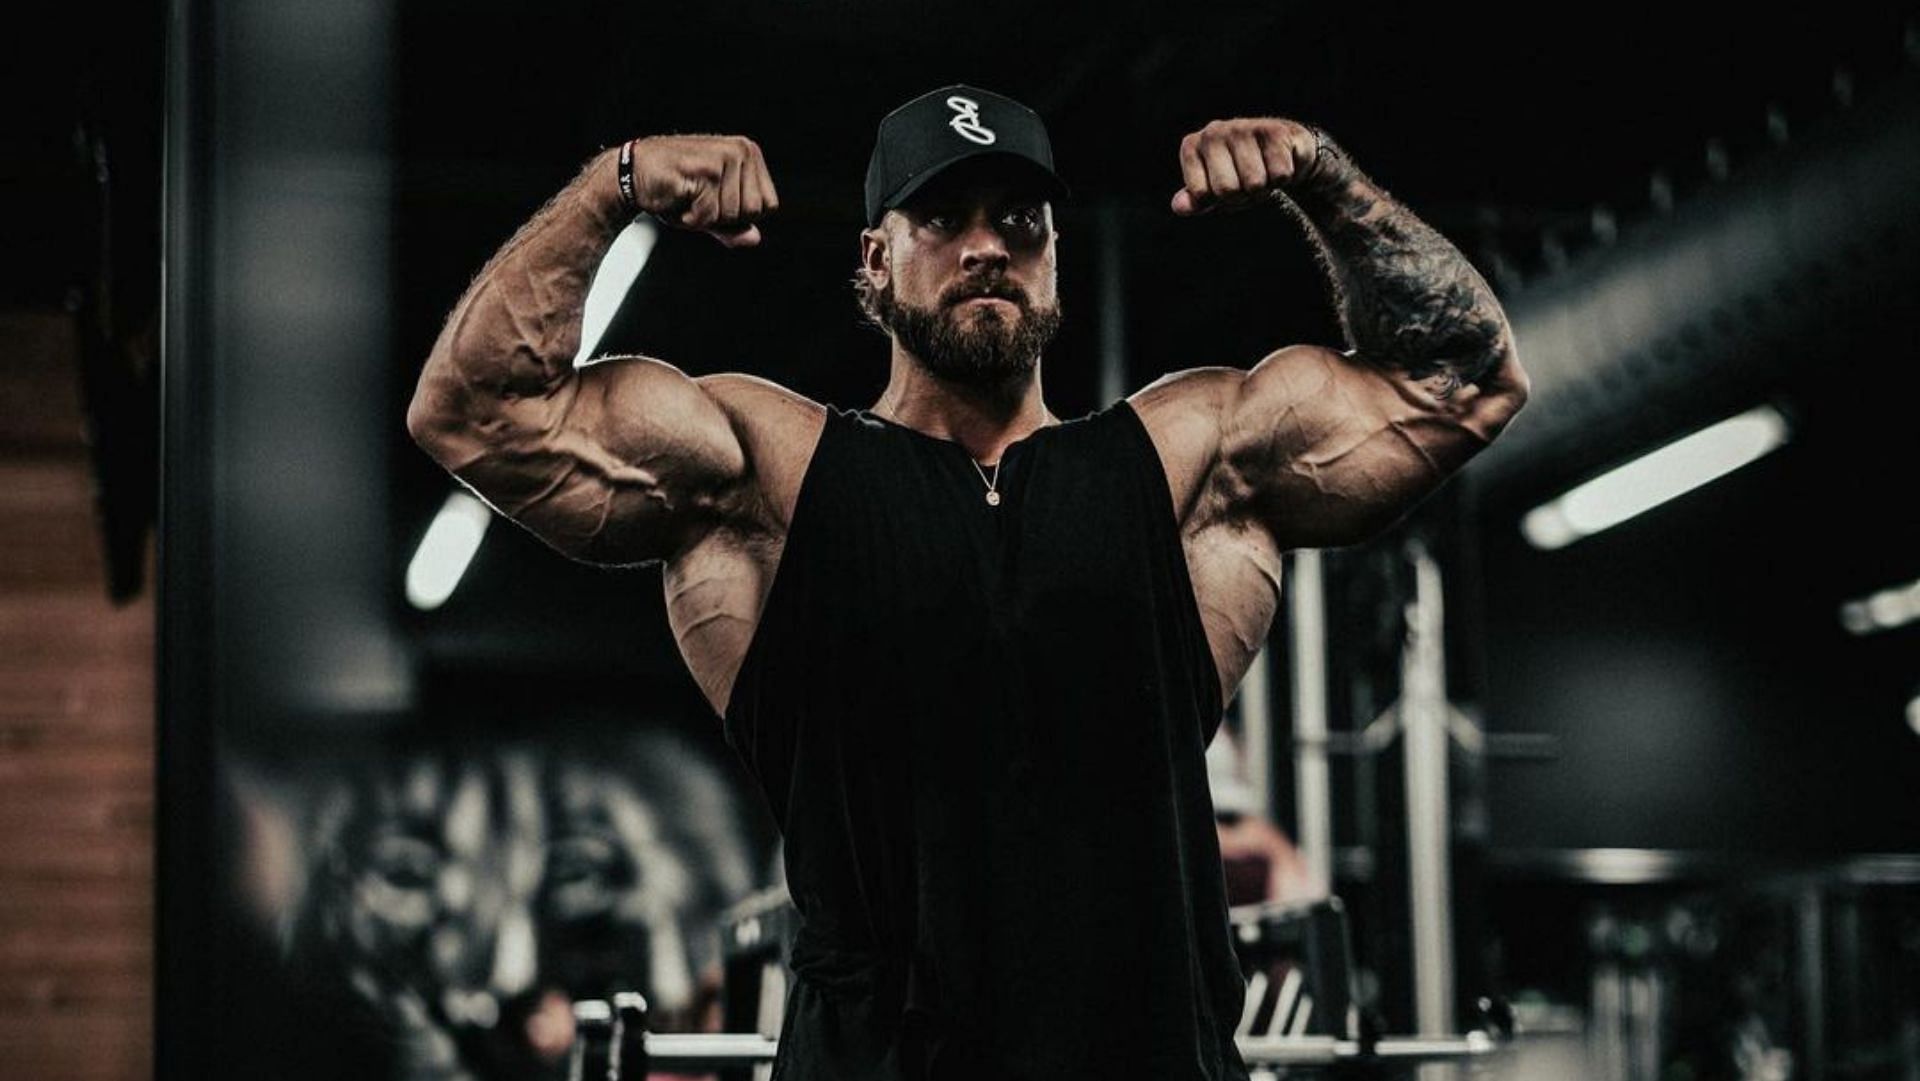 Chris Bumstead follows a routine that helped him secure Mr. Olympia titles. (Photo via Chris Bumstead